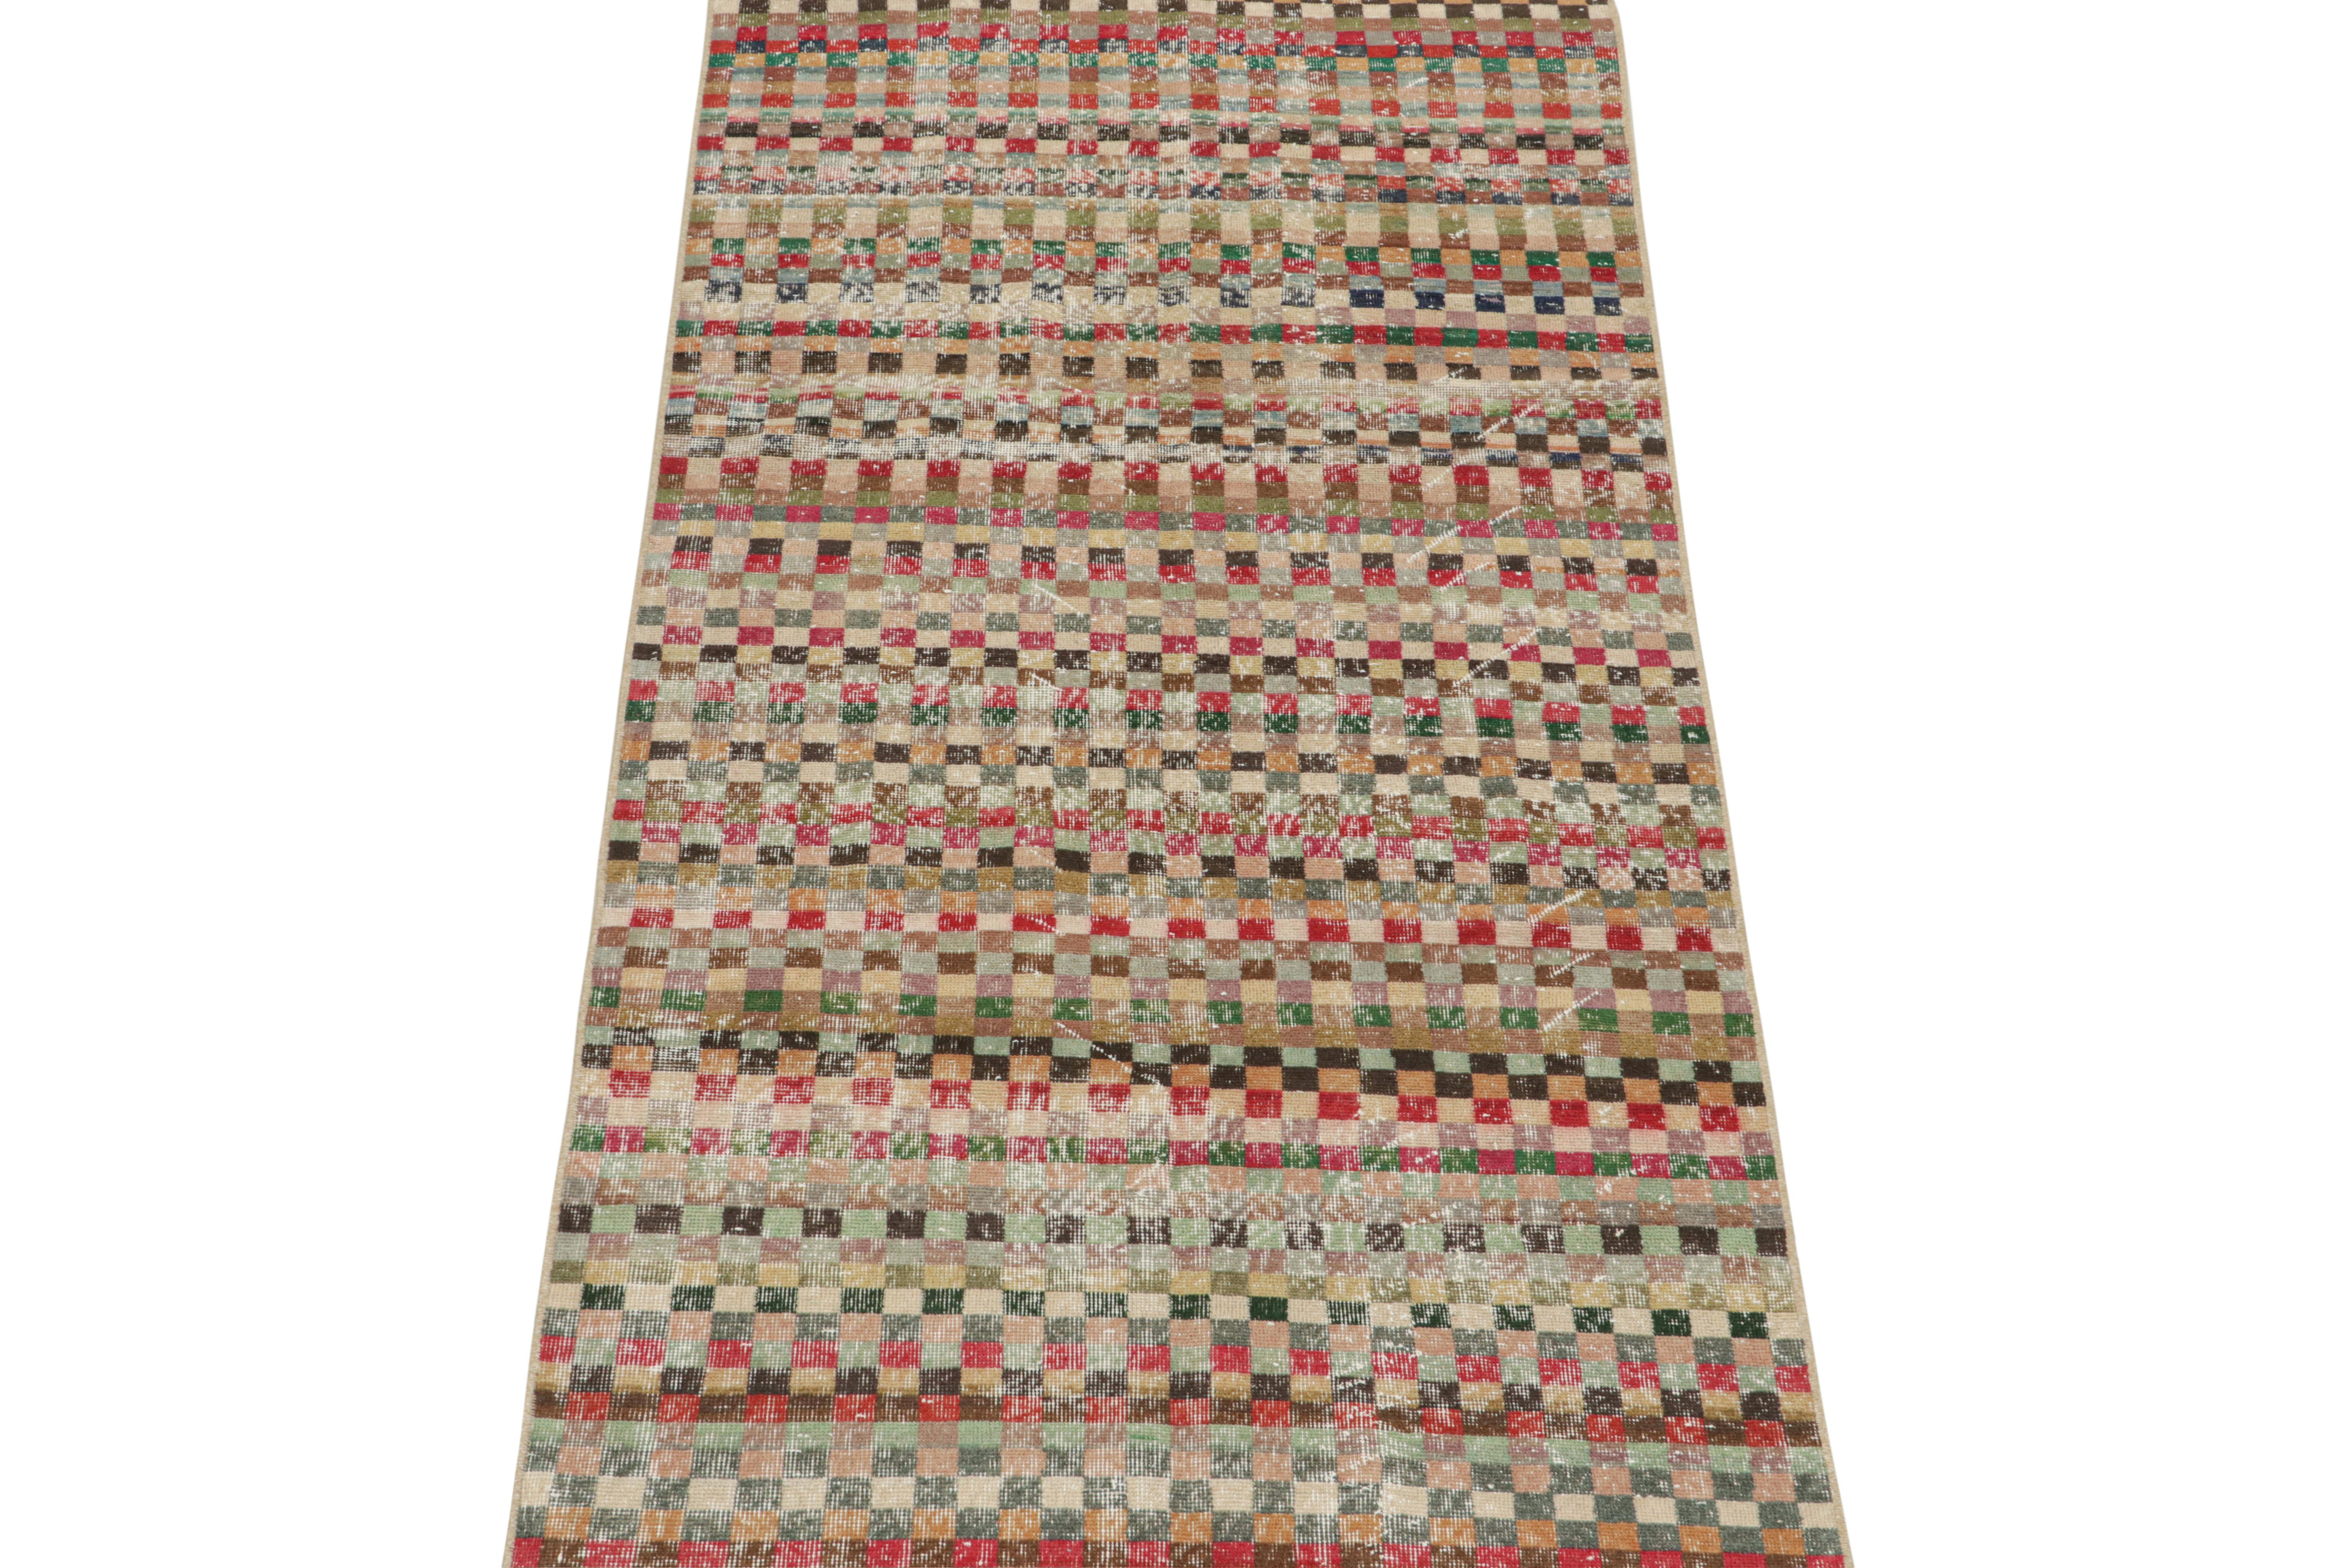 This vintage 4x9 rug is a new addition to Rug & Kilim’s midcentury Pasha Collection. This line is a commemoration, with rare curations we believe to hail from multidisciplinary Turkish designer Zeki Müren. 

Further on the Design:

This